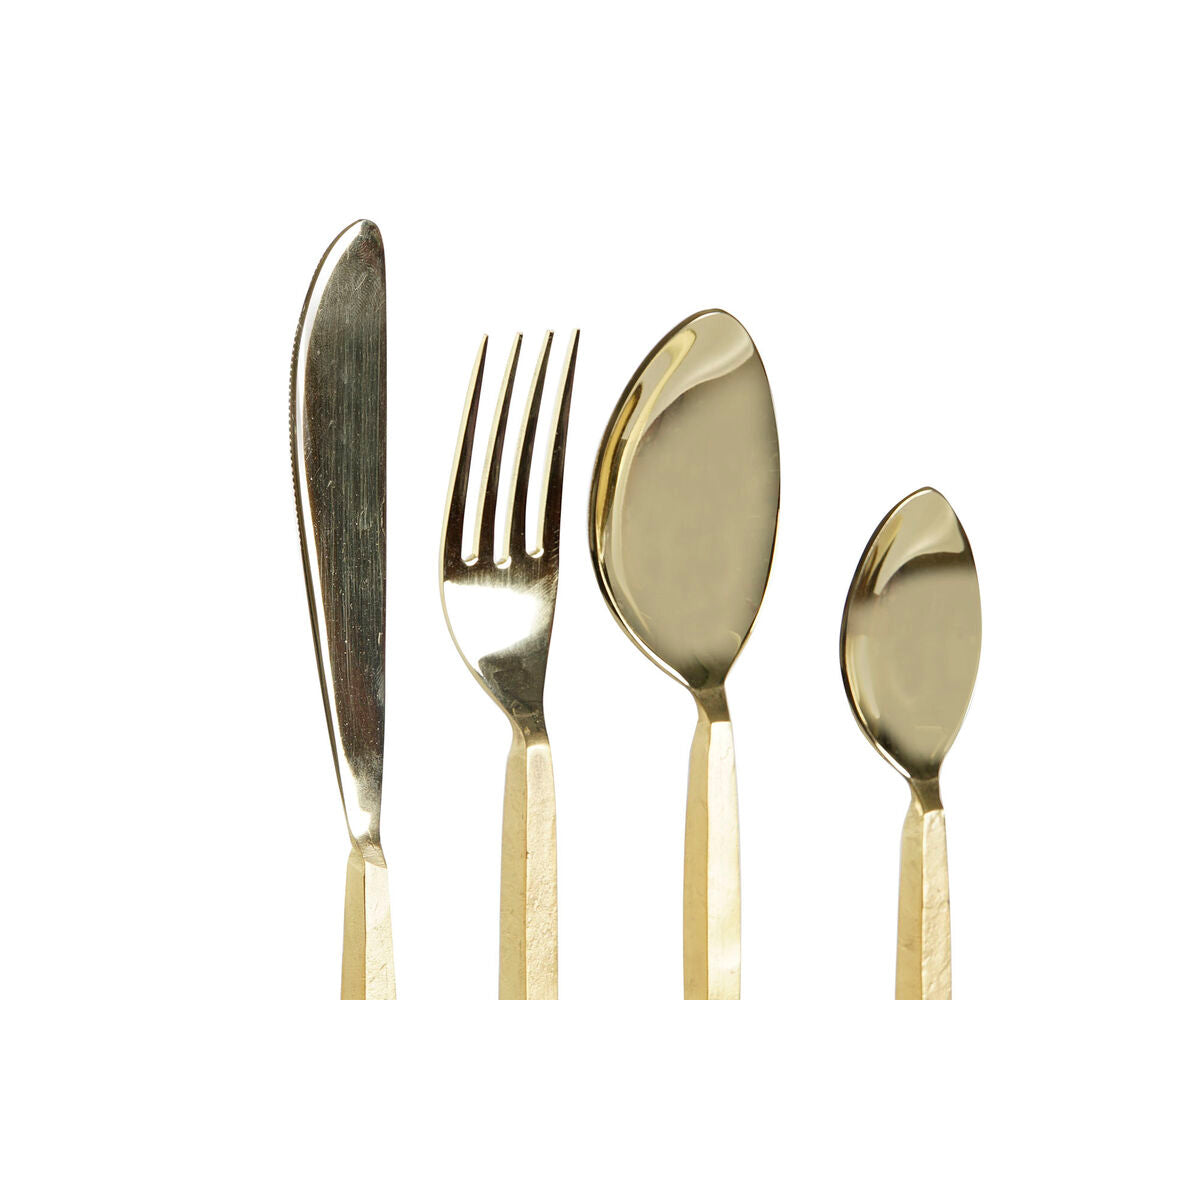 Cutlery sets golden stainless steel - 16 pieces